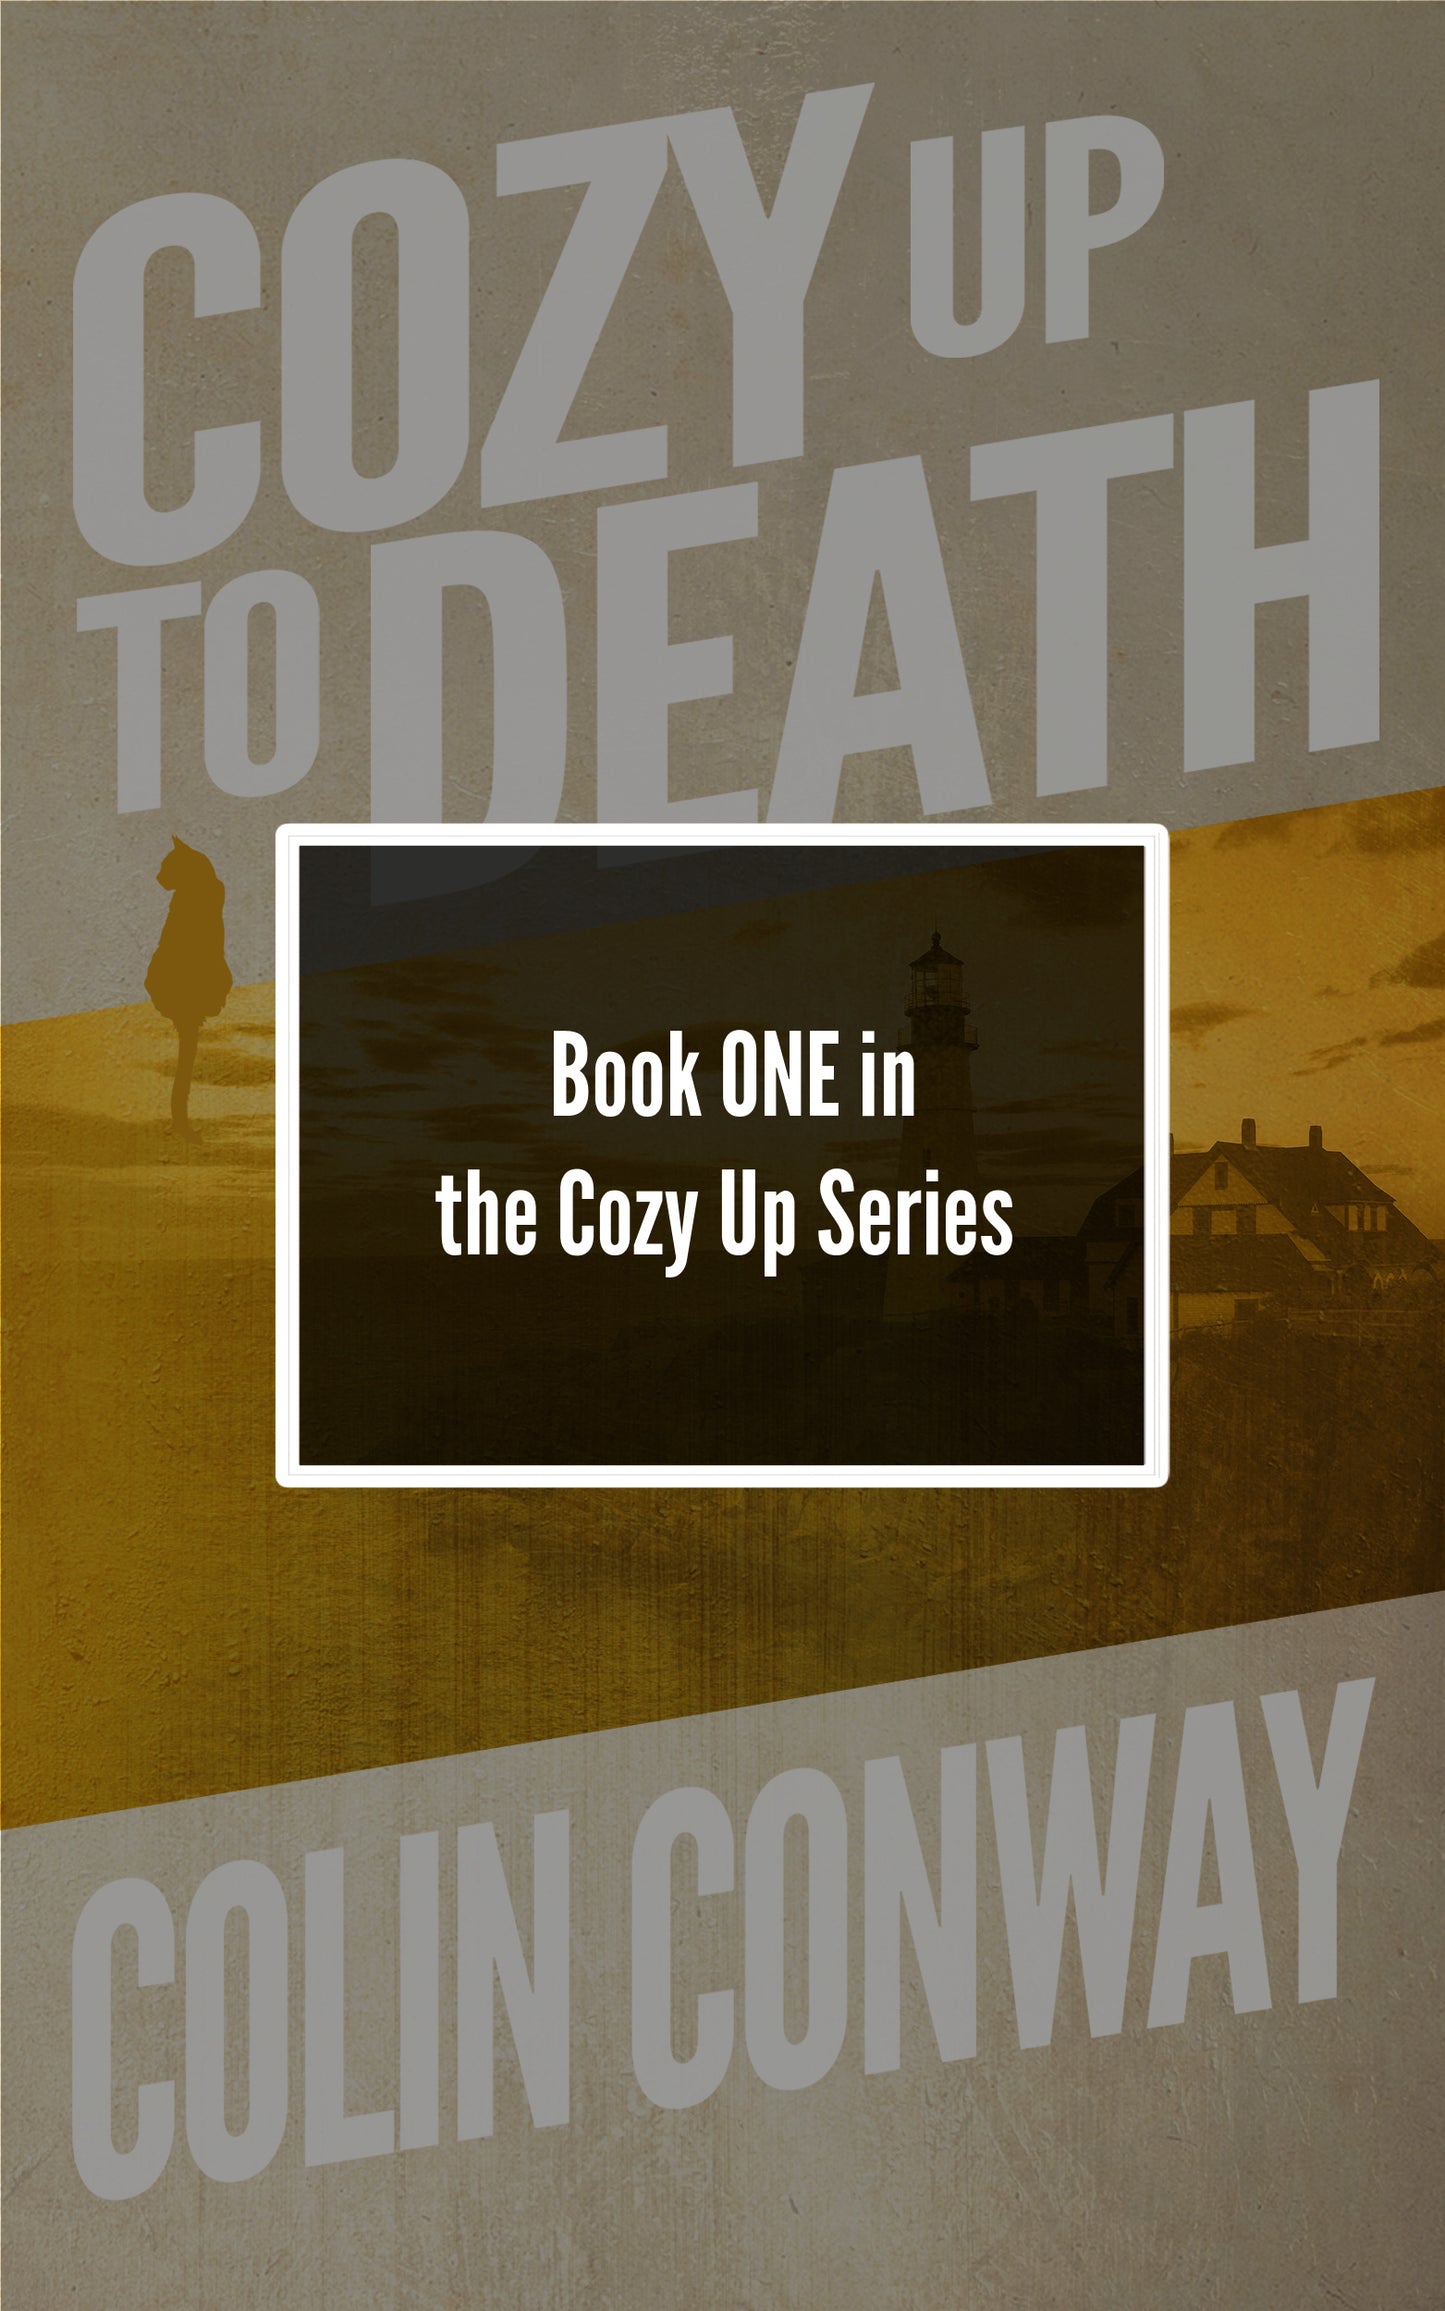 COZY UP TO DEATH is a hysterical mystery novel by Colin Conway. Imagine if THE SONS OF ANARCHY crashed into an episode of MURDER, SHE WROTE, and you’ll have a good idea of what this humorous series is all about.